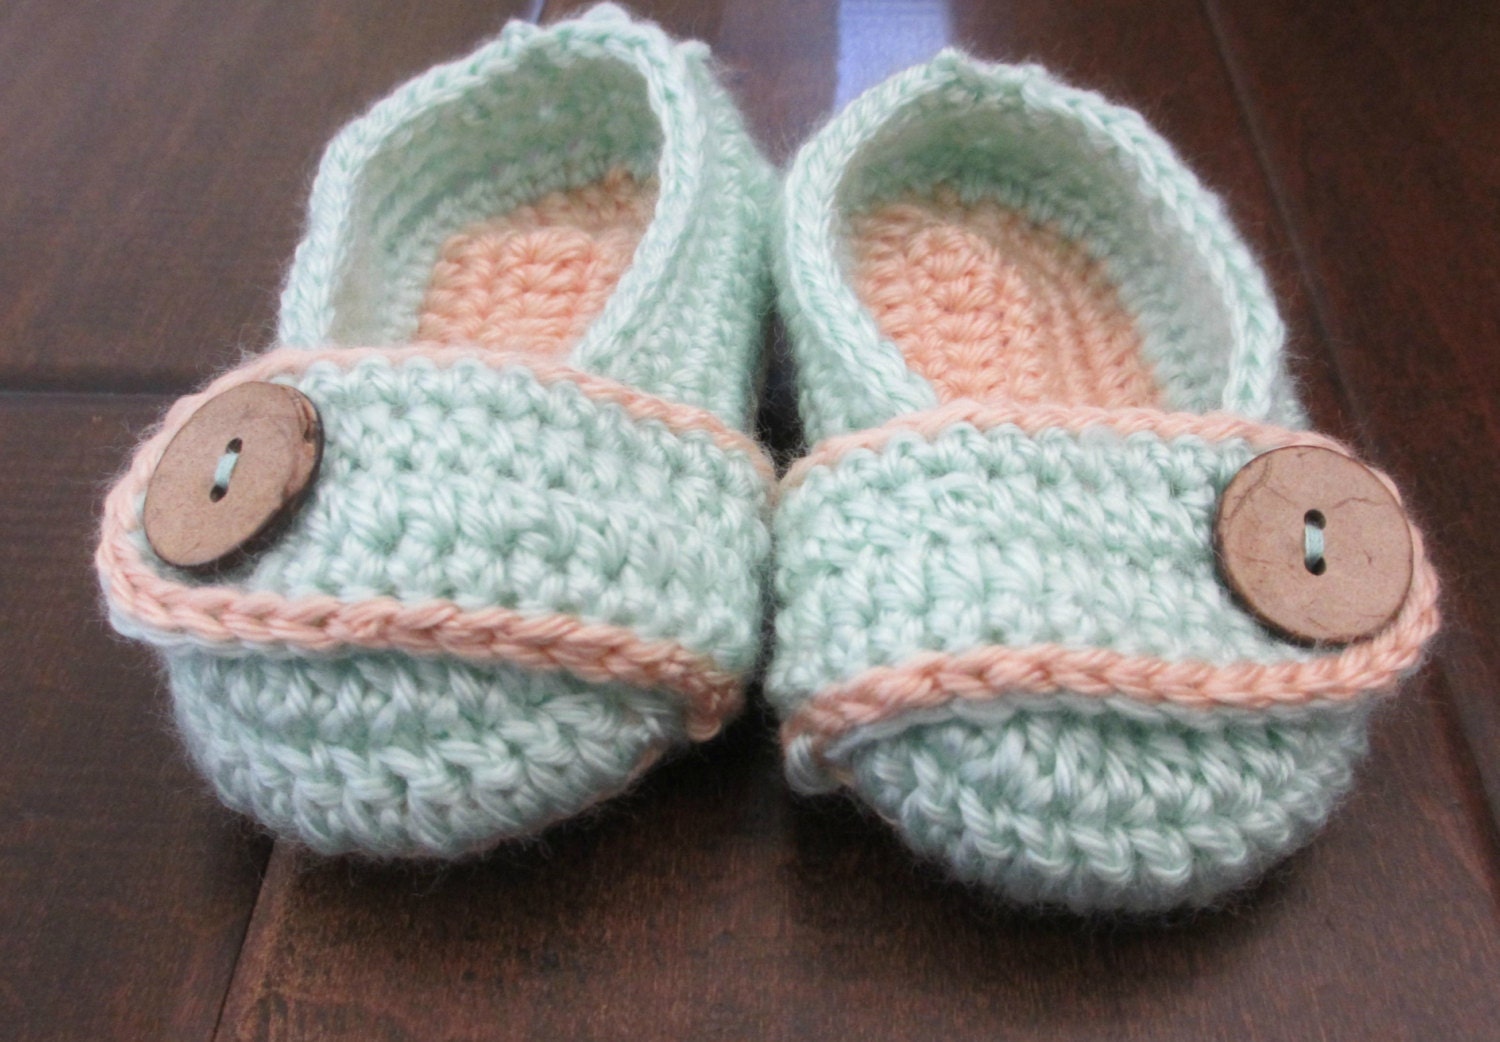 Child Toddler Baby Button Slippers Crochet shoes crochet | Etsy